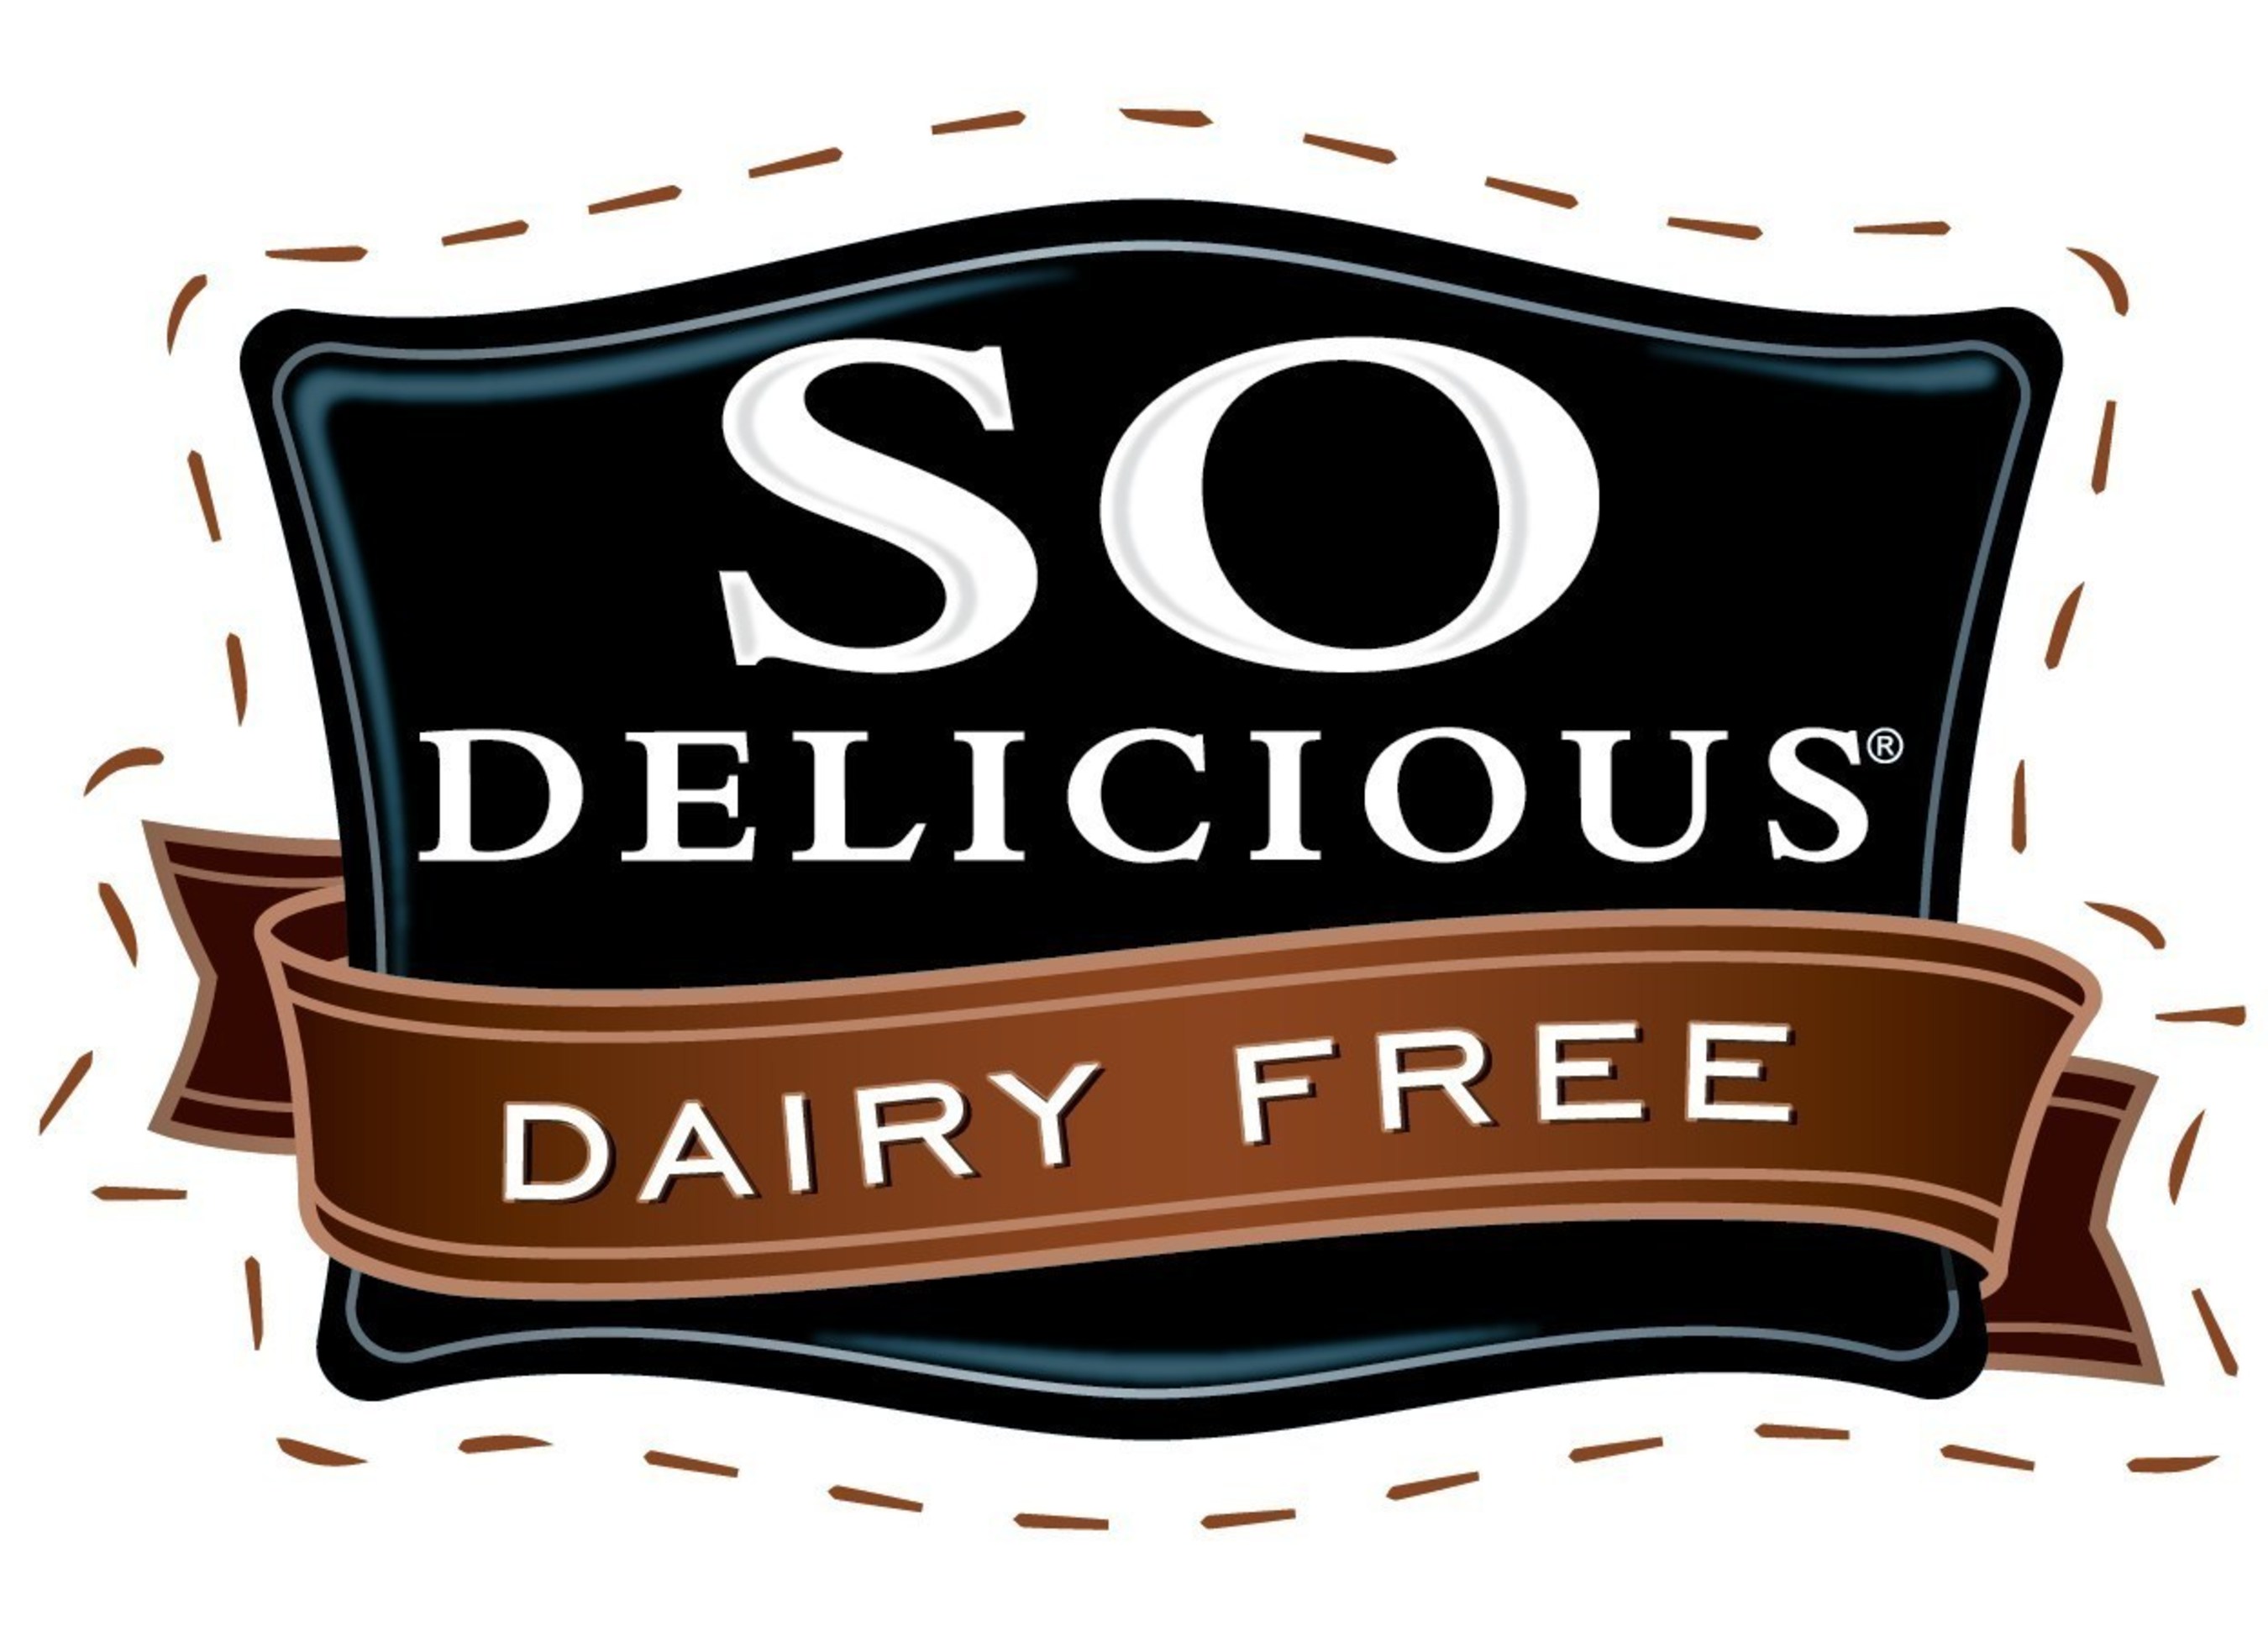 So Delicious(R) Dairy Free provides consumers with the broadest selection of delicious alternatives to dairy-based foods and beverages. All products are 100% plant based and Non-GMO Project Verified with no artificial sweeteners, trans-fats or hydrogenated oils, and many are made with certified organic and fair trade ingredients. Products include dairy-free frozen desserts, beverages, cultured products, coffee creamers and more. For complete nutritional info, visit SoDeliciousDairyFree.com